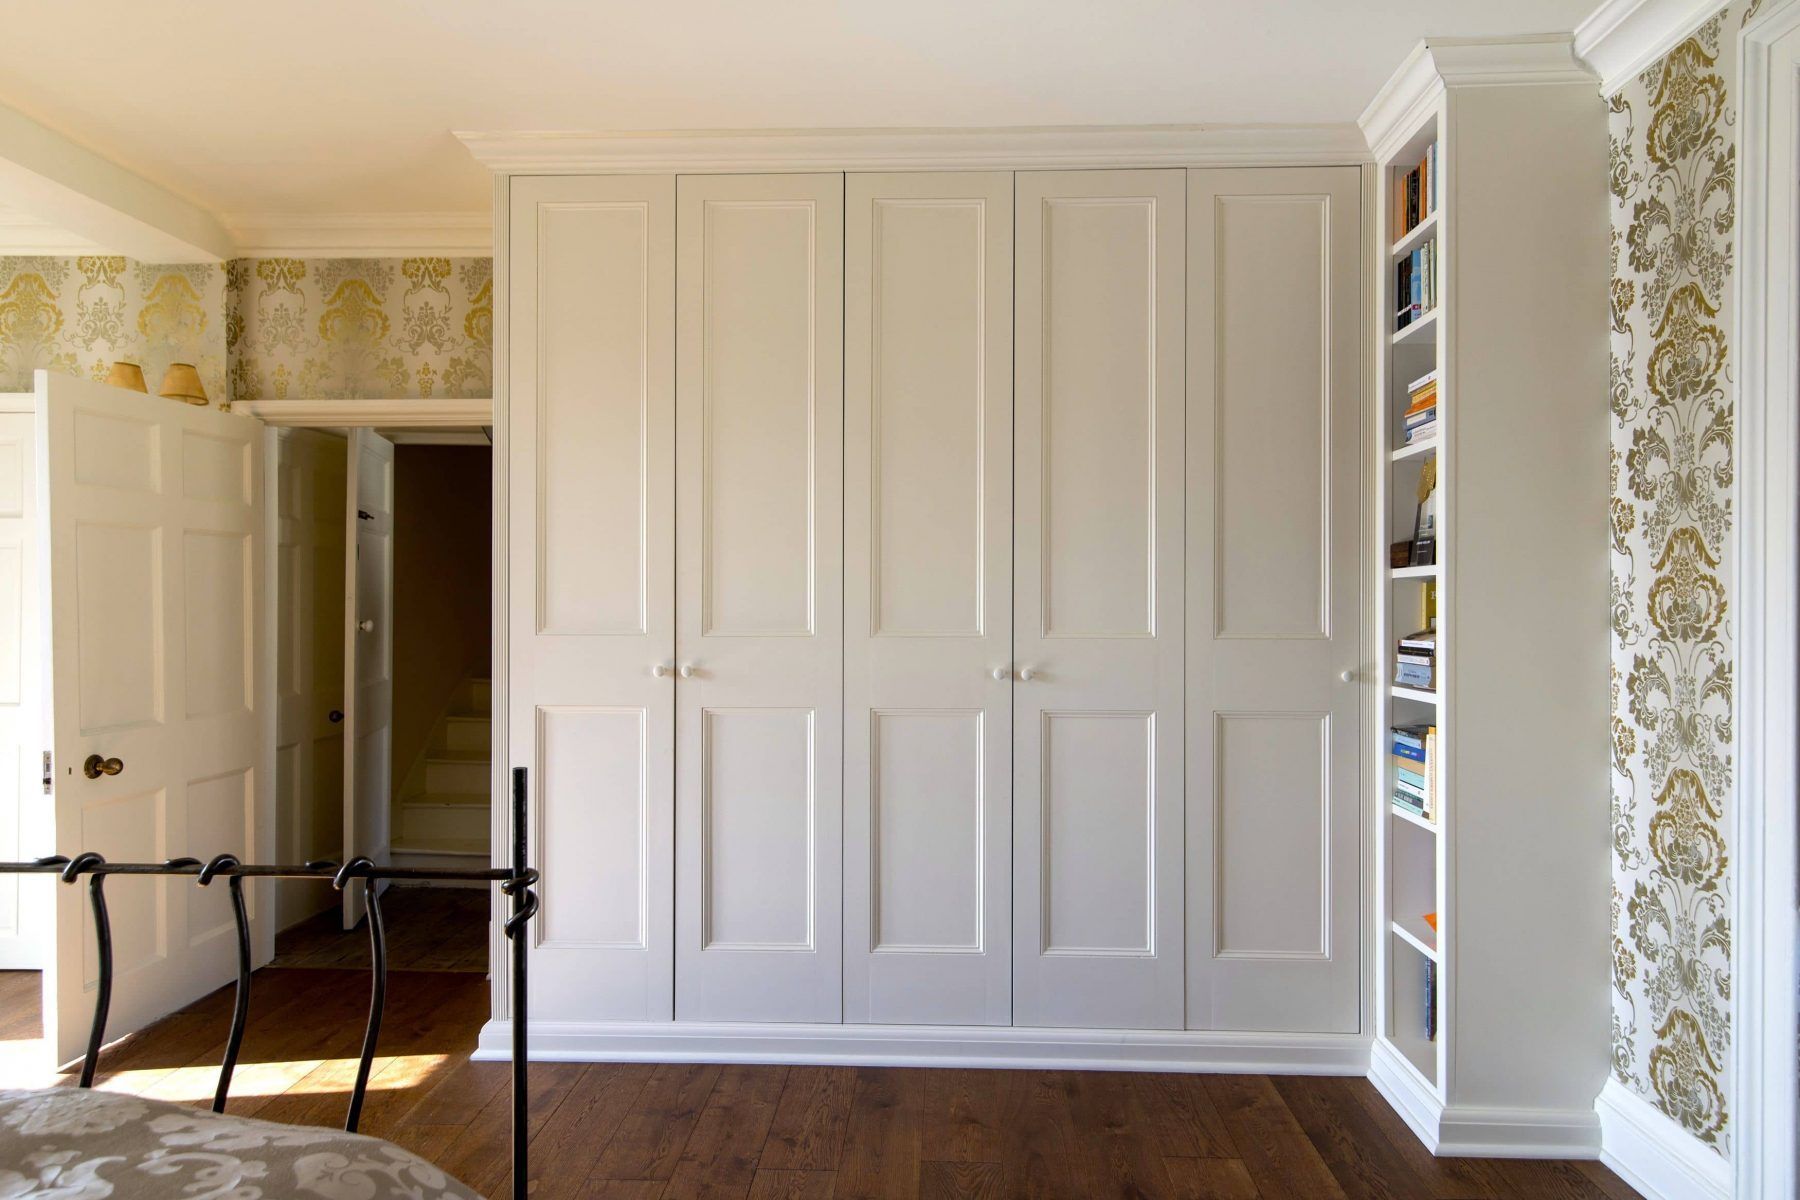 Image Result For Building Fitted Wardrobes Traditional Doors | Fitted  Wardrobes, Bespoke Wardrobe, Built In Wardrobe With Regard To Traditional Wardrobes (Photo 3 of 15)